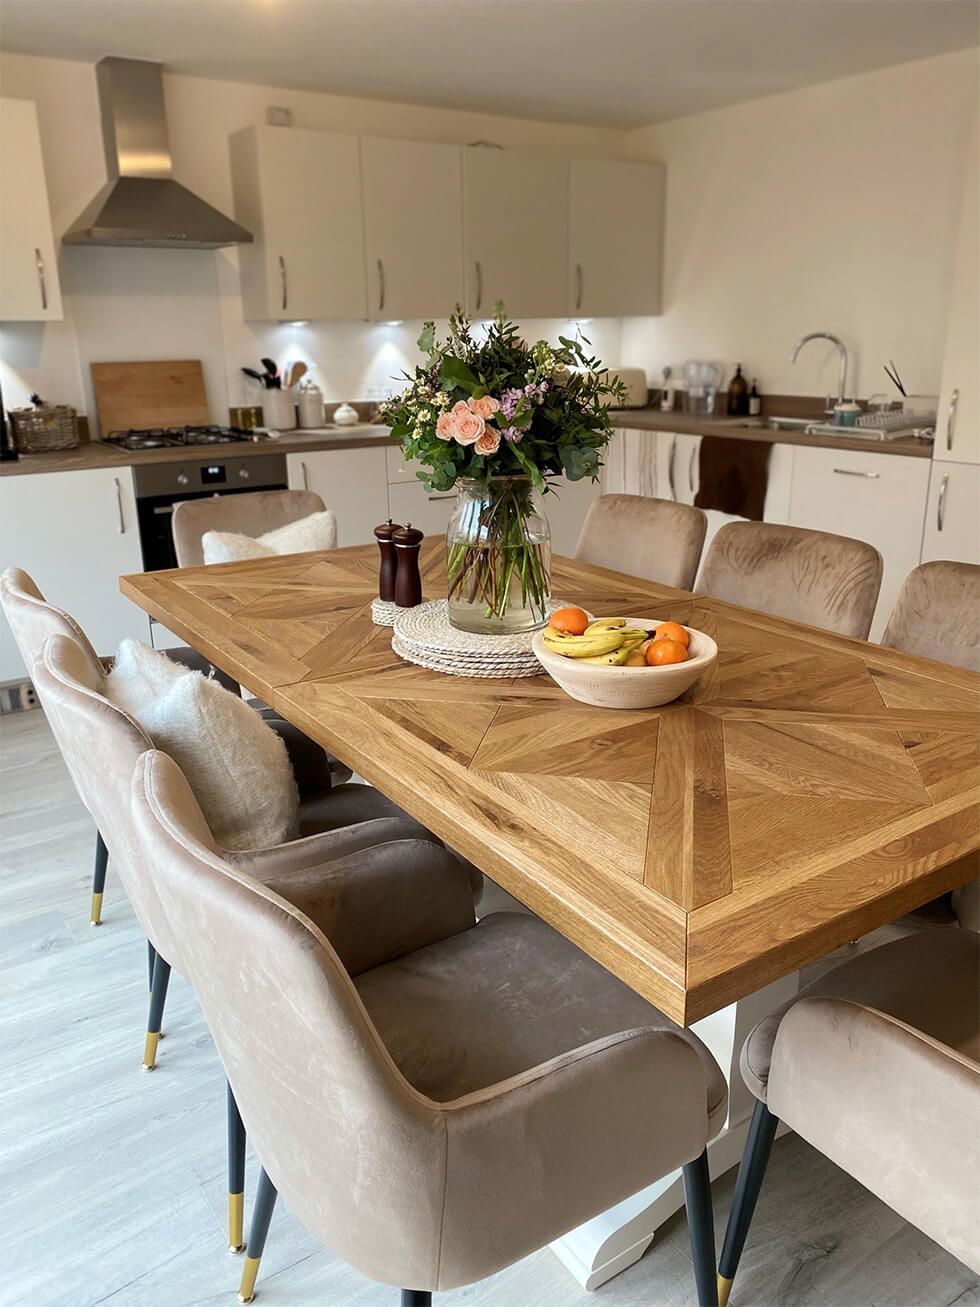 A neutral kitchen and dining area with a large wooden table and beige velvet chairs